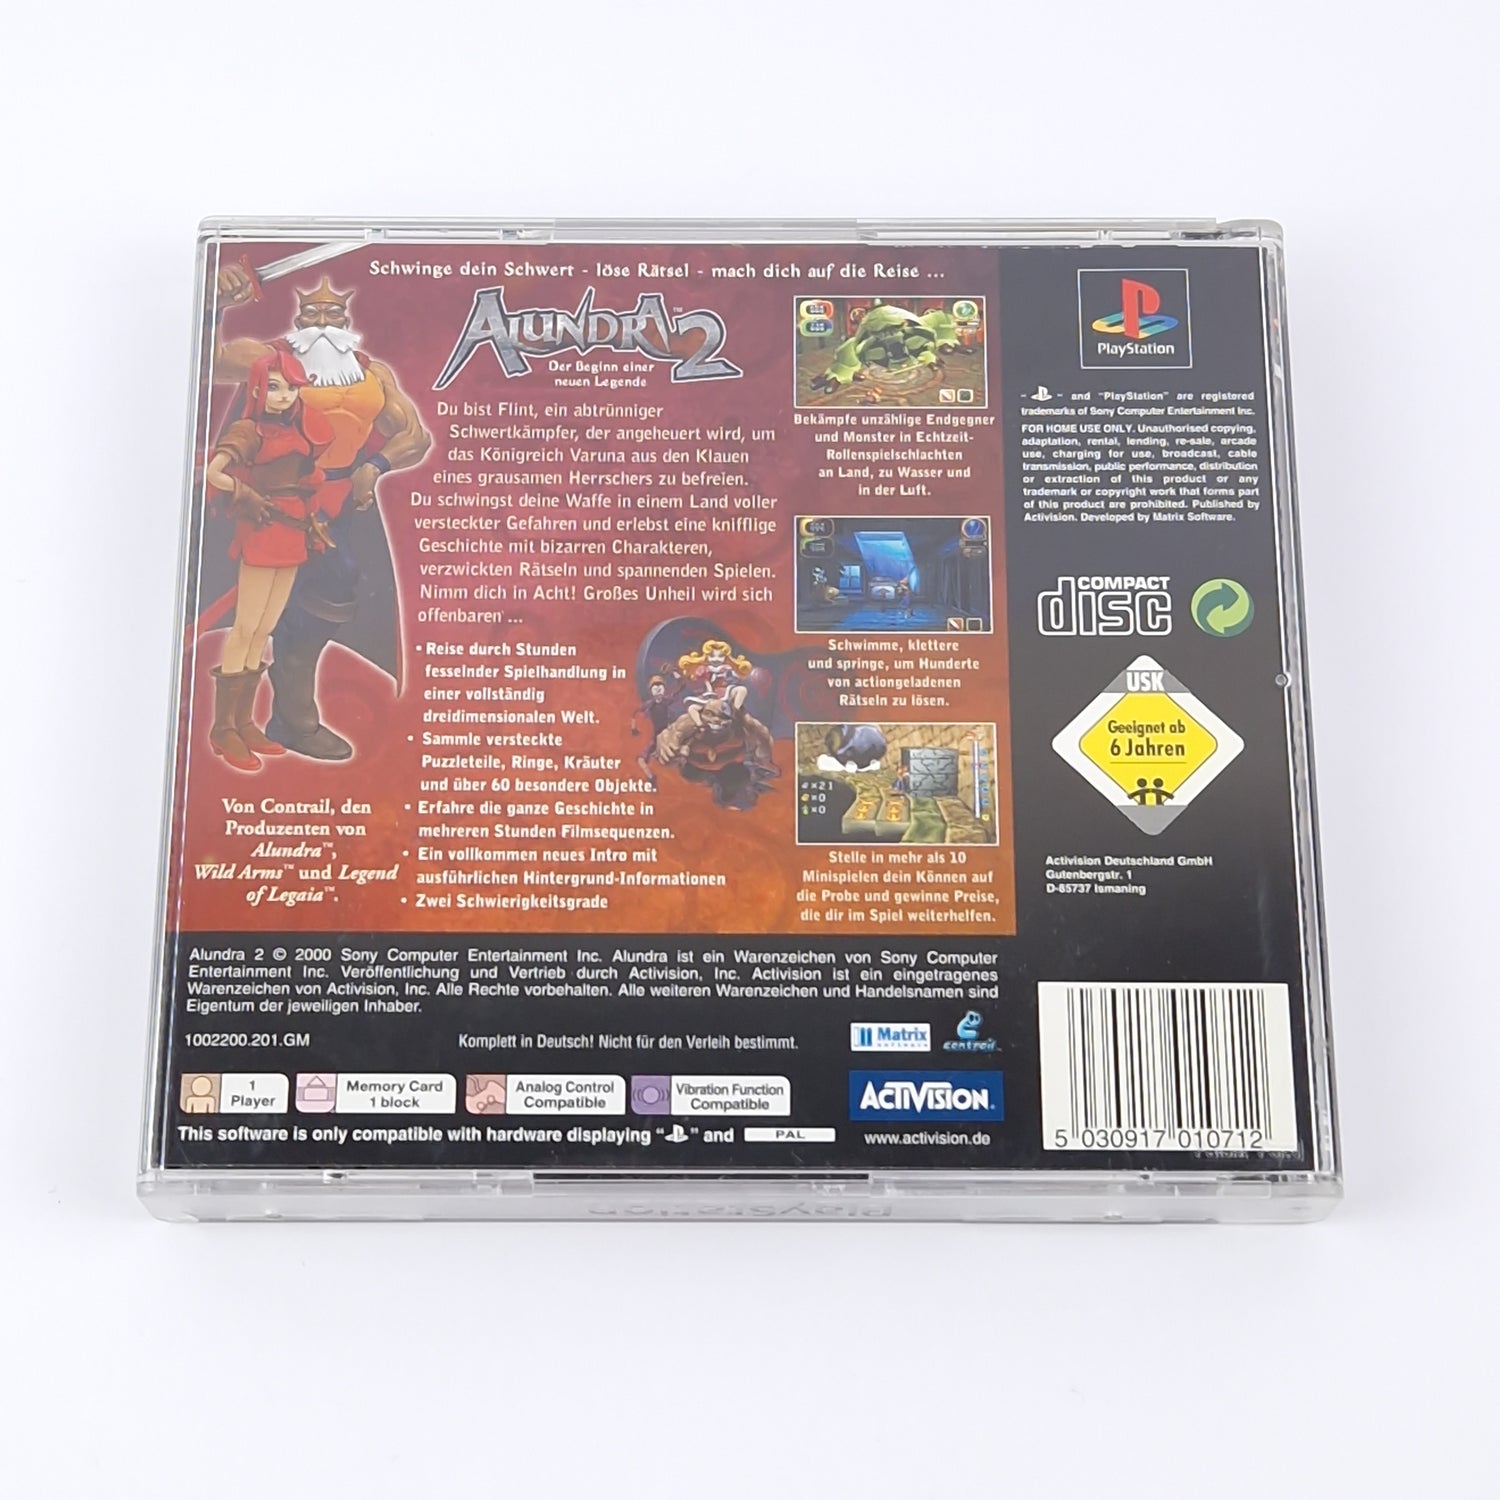 Sony Playstation 1 Spiel : Alundra 2 - OVP Anleitung CD - PAL PS1 PSX